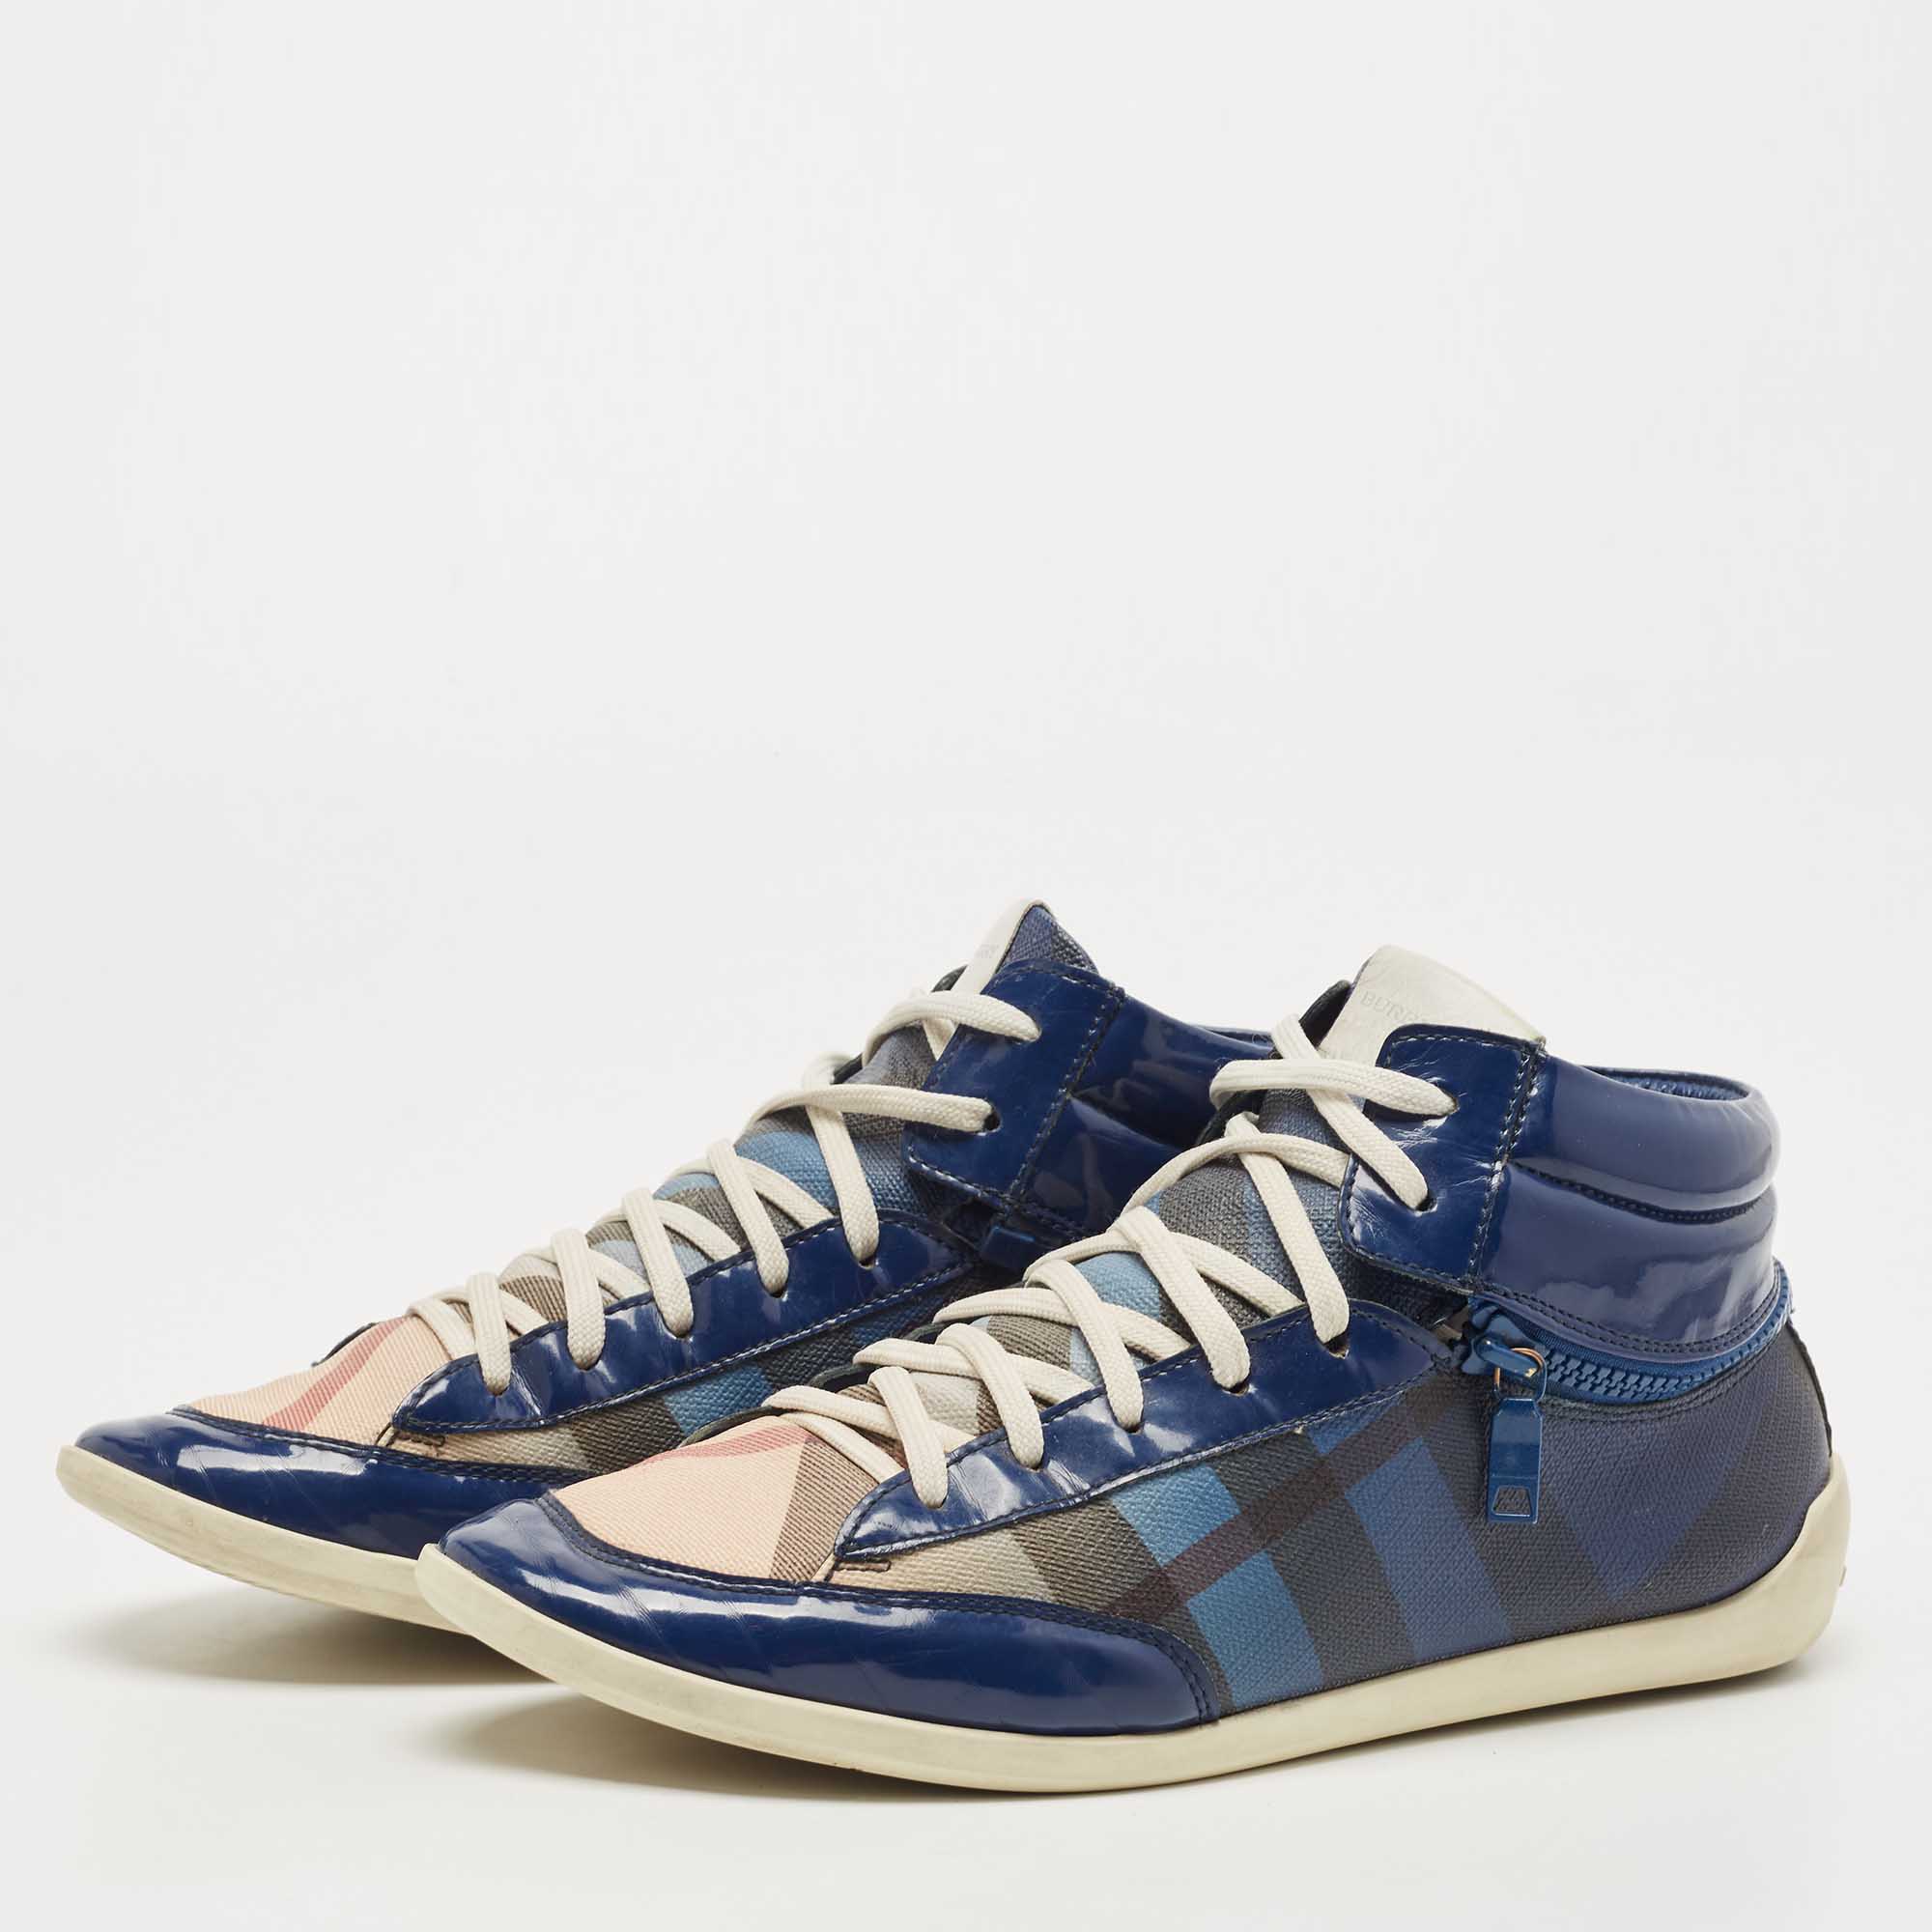 

Burberry Blue Patent Leather and Ombre Nova Check Canvas Zipper High Top Sneakers Size